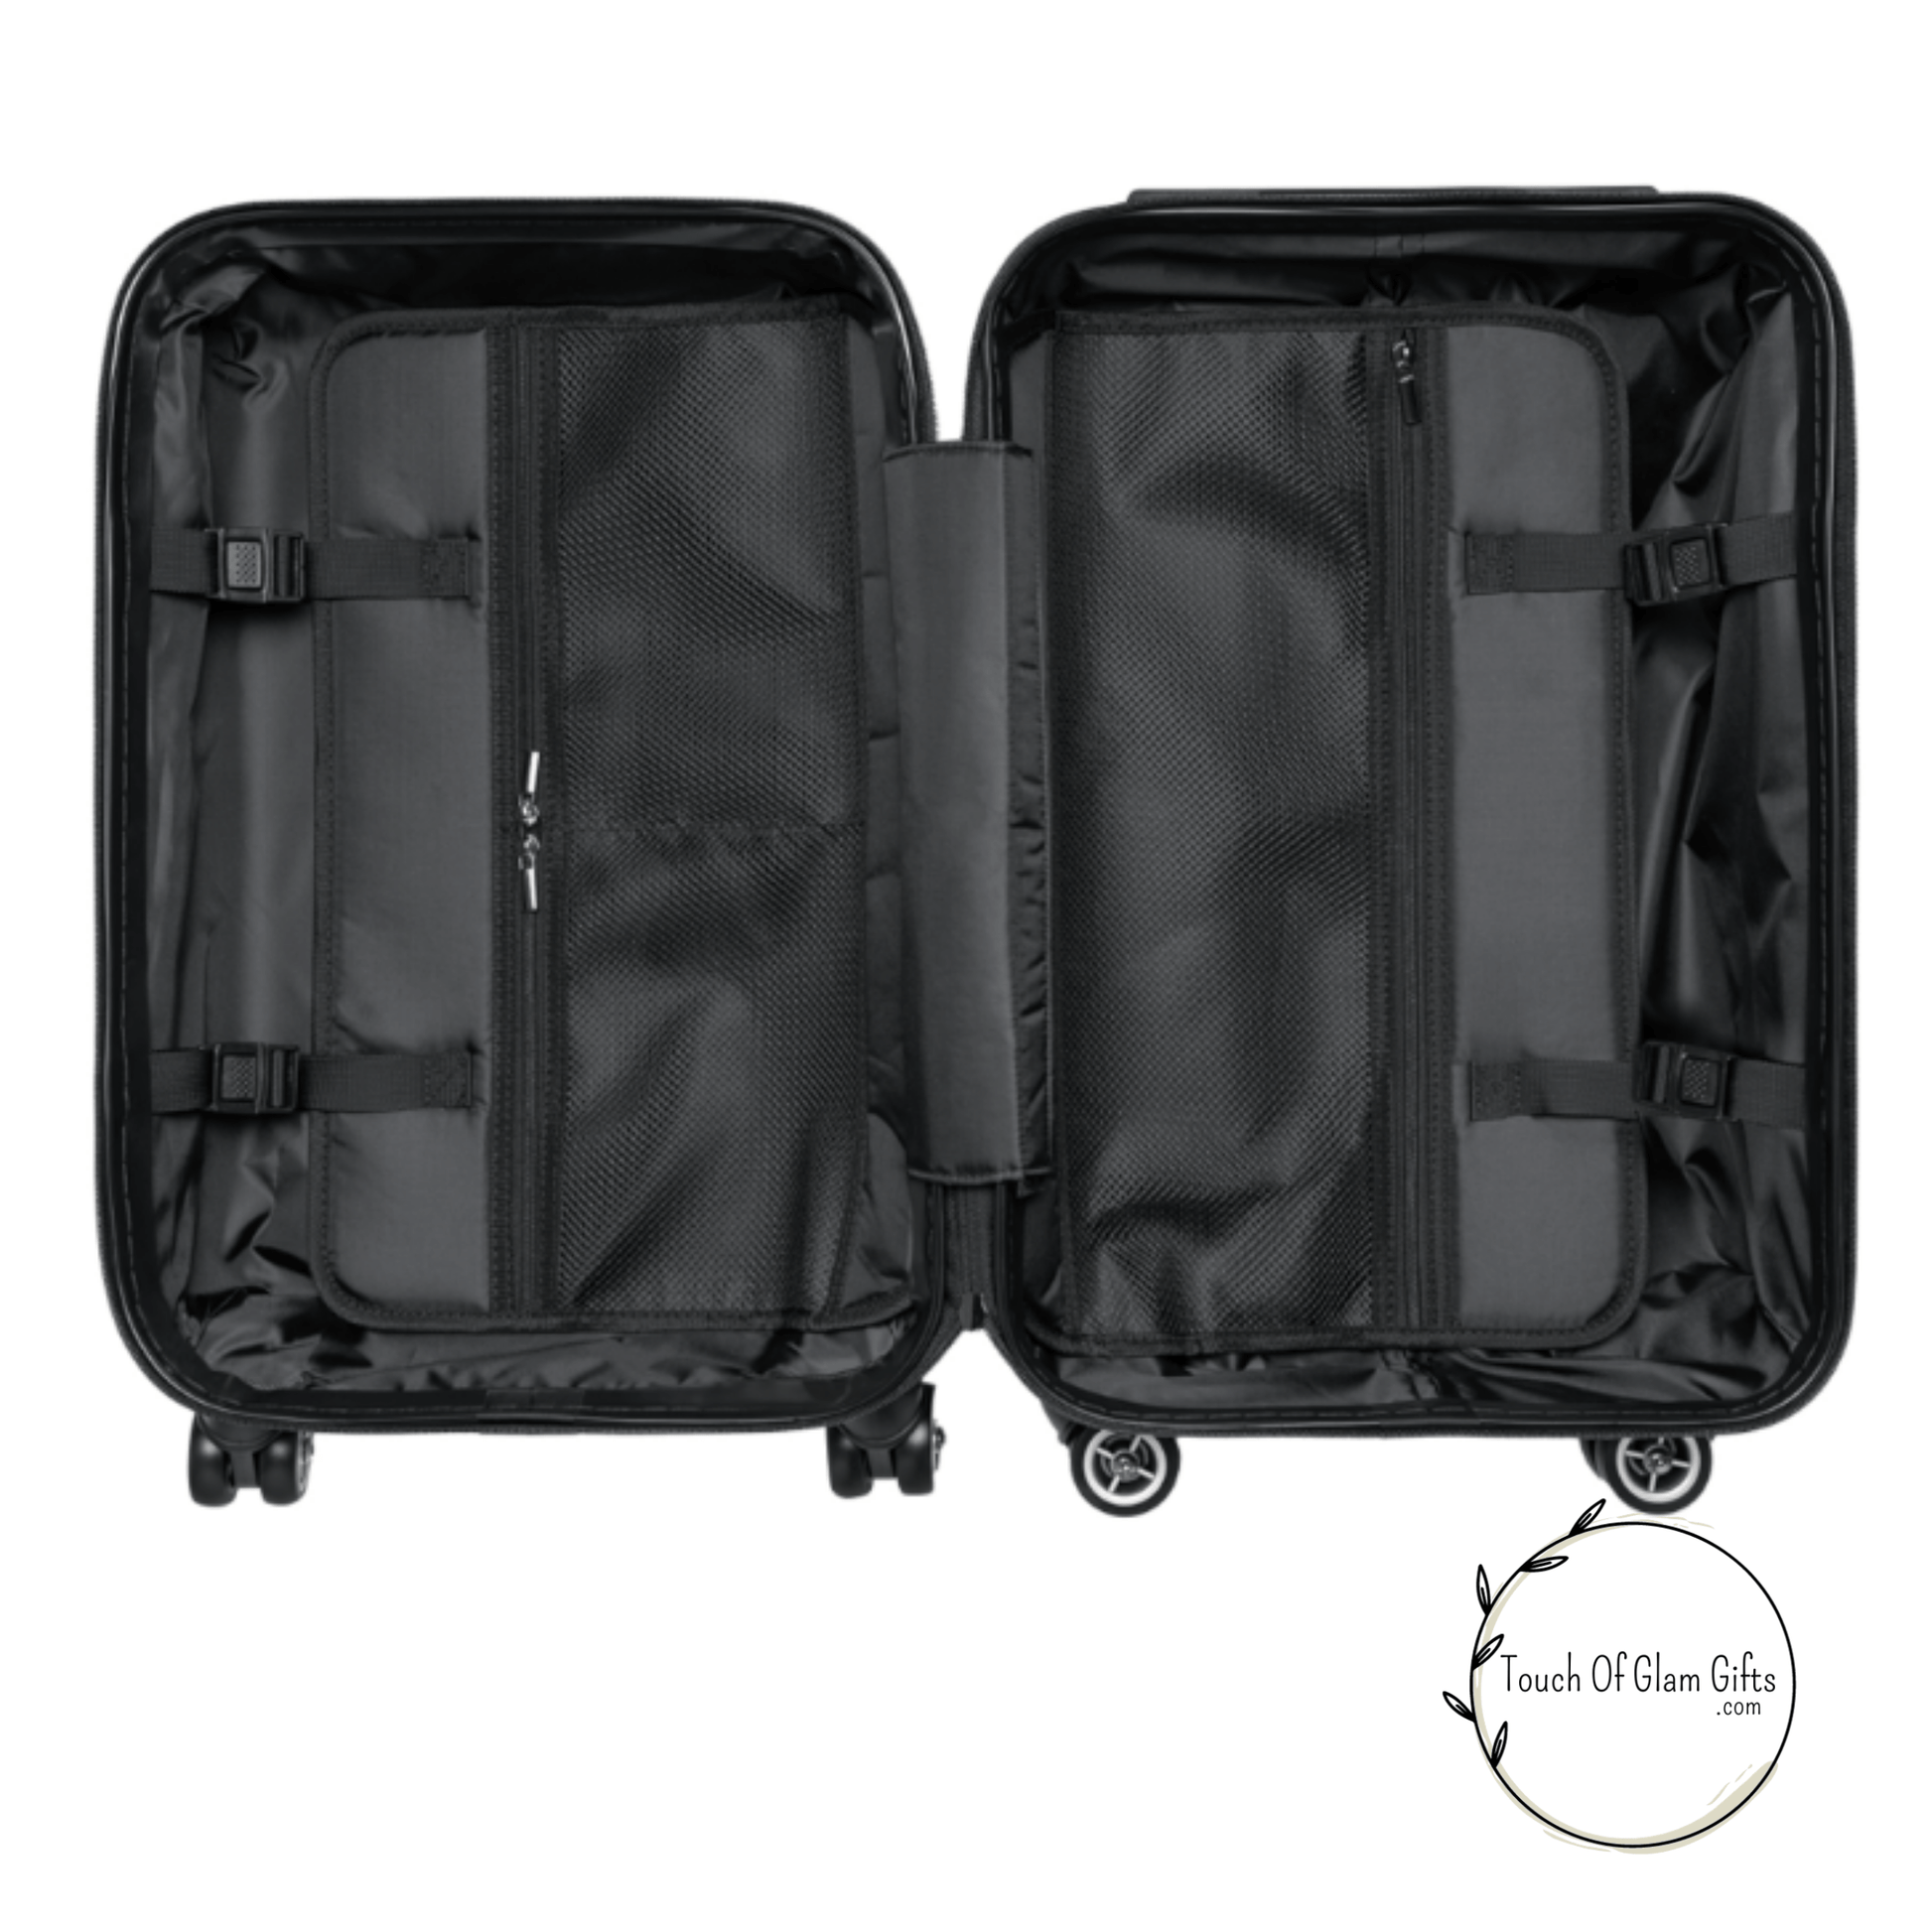 The inside of each luggage shows flaps with pockets to hold your personal belongings on each side.